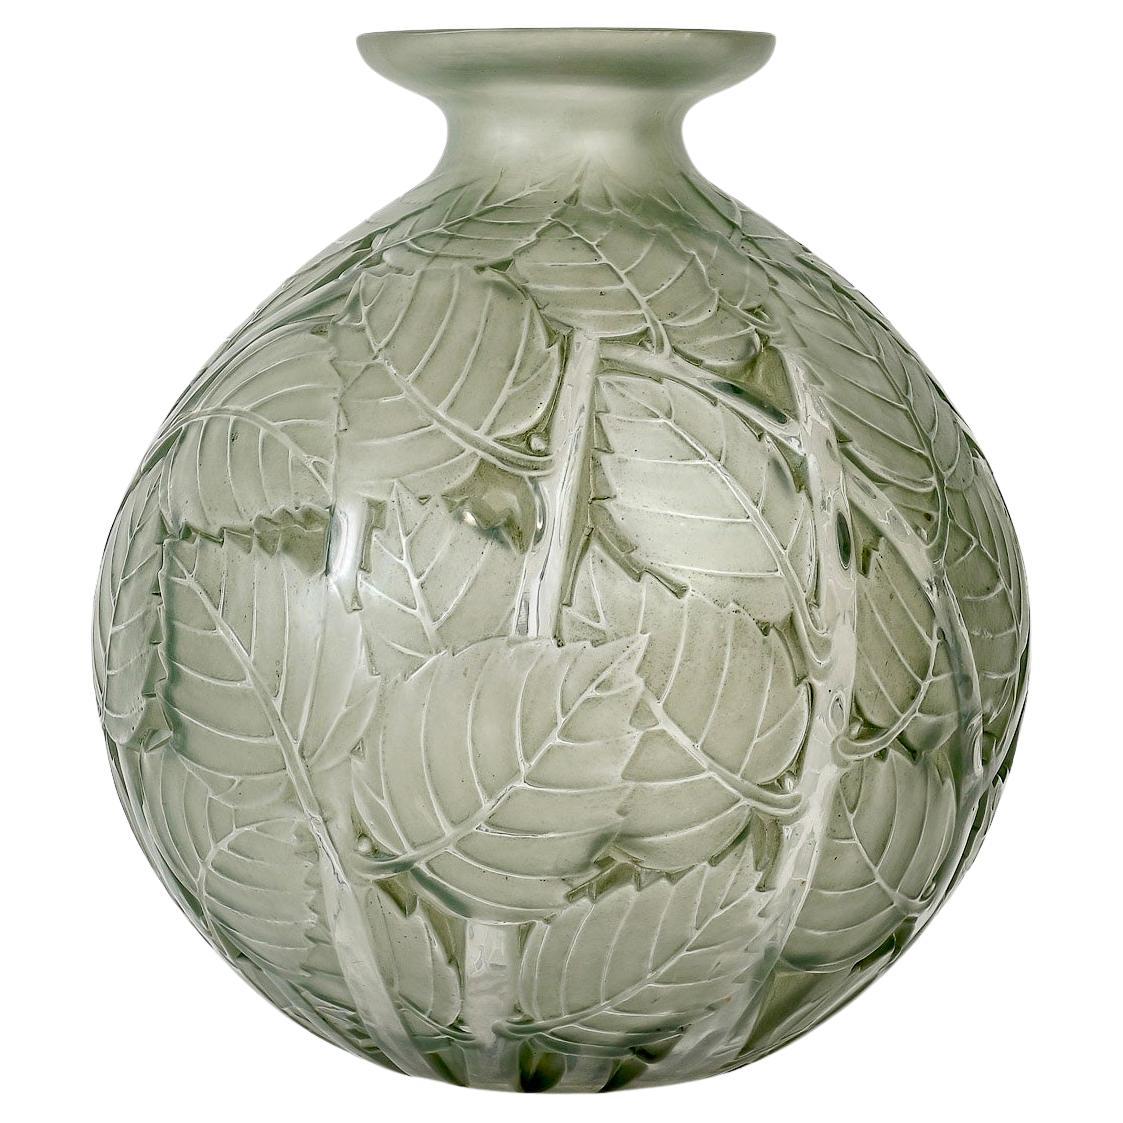 1929 Rene Lalique Vase Milan Frosted Glass with Green Patina